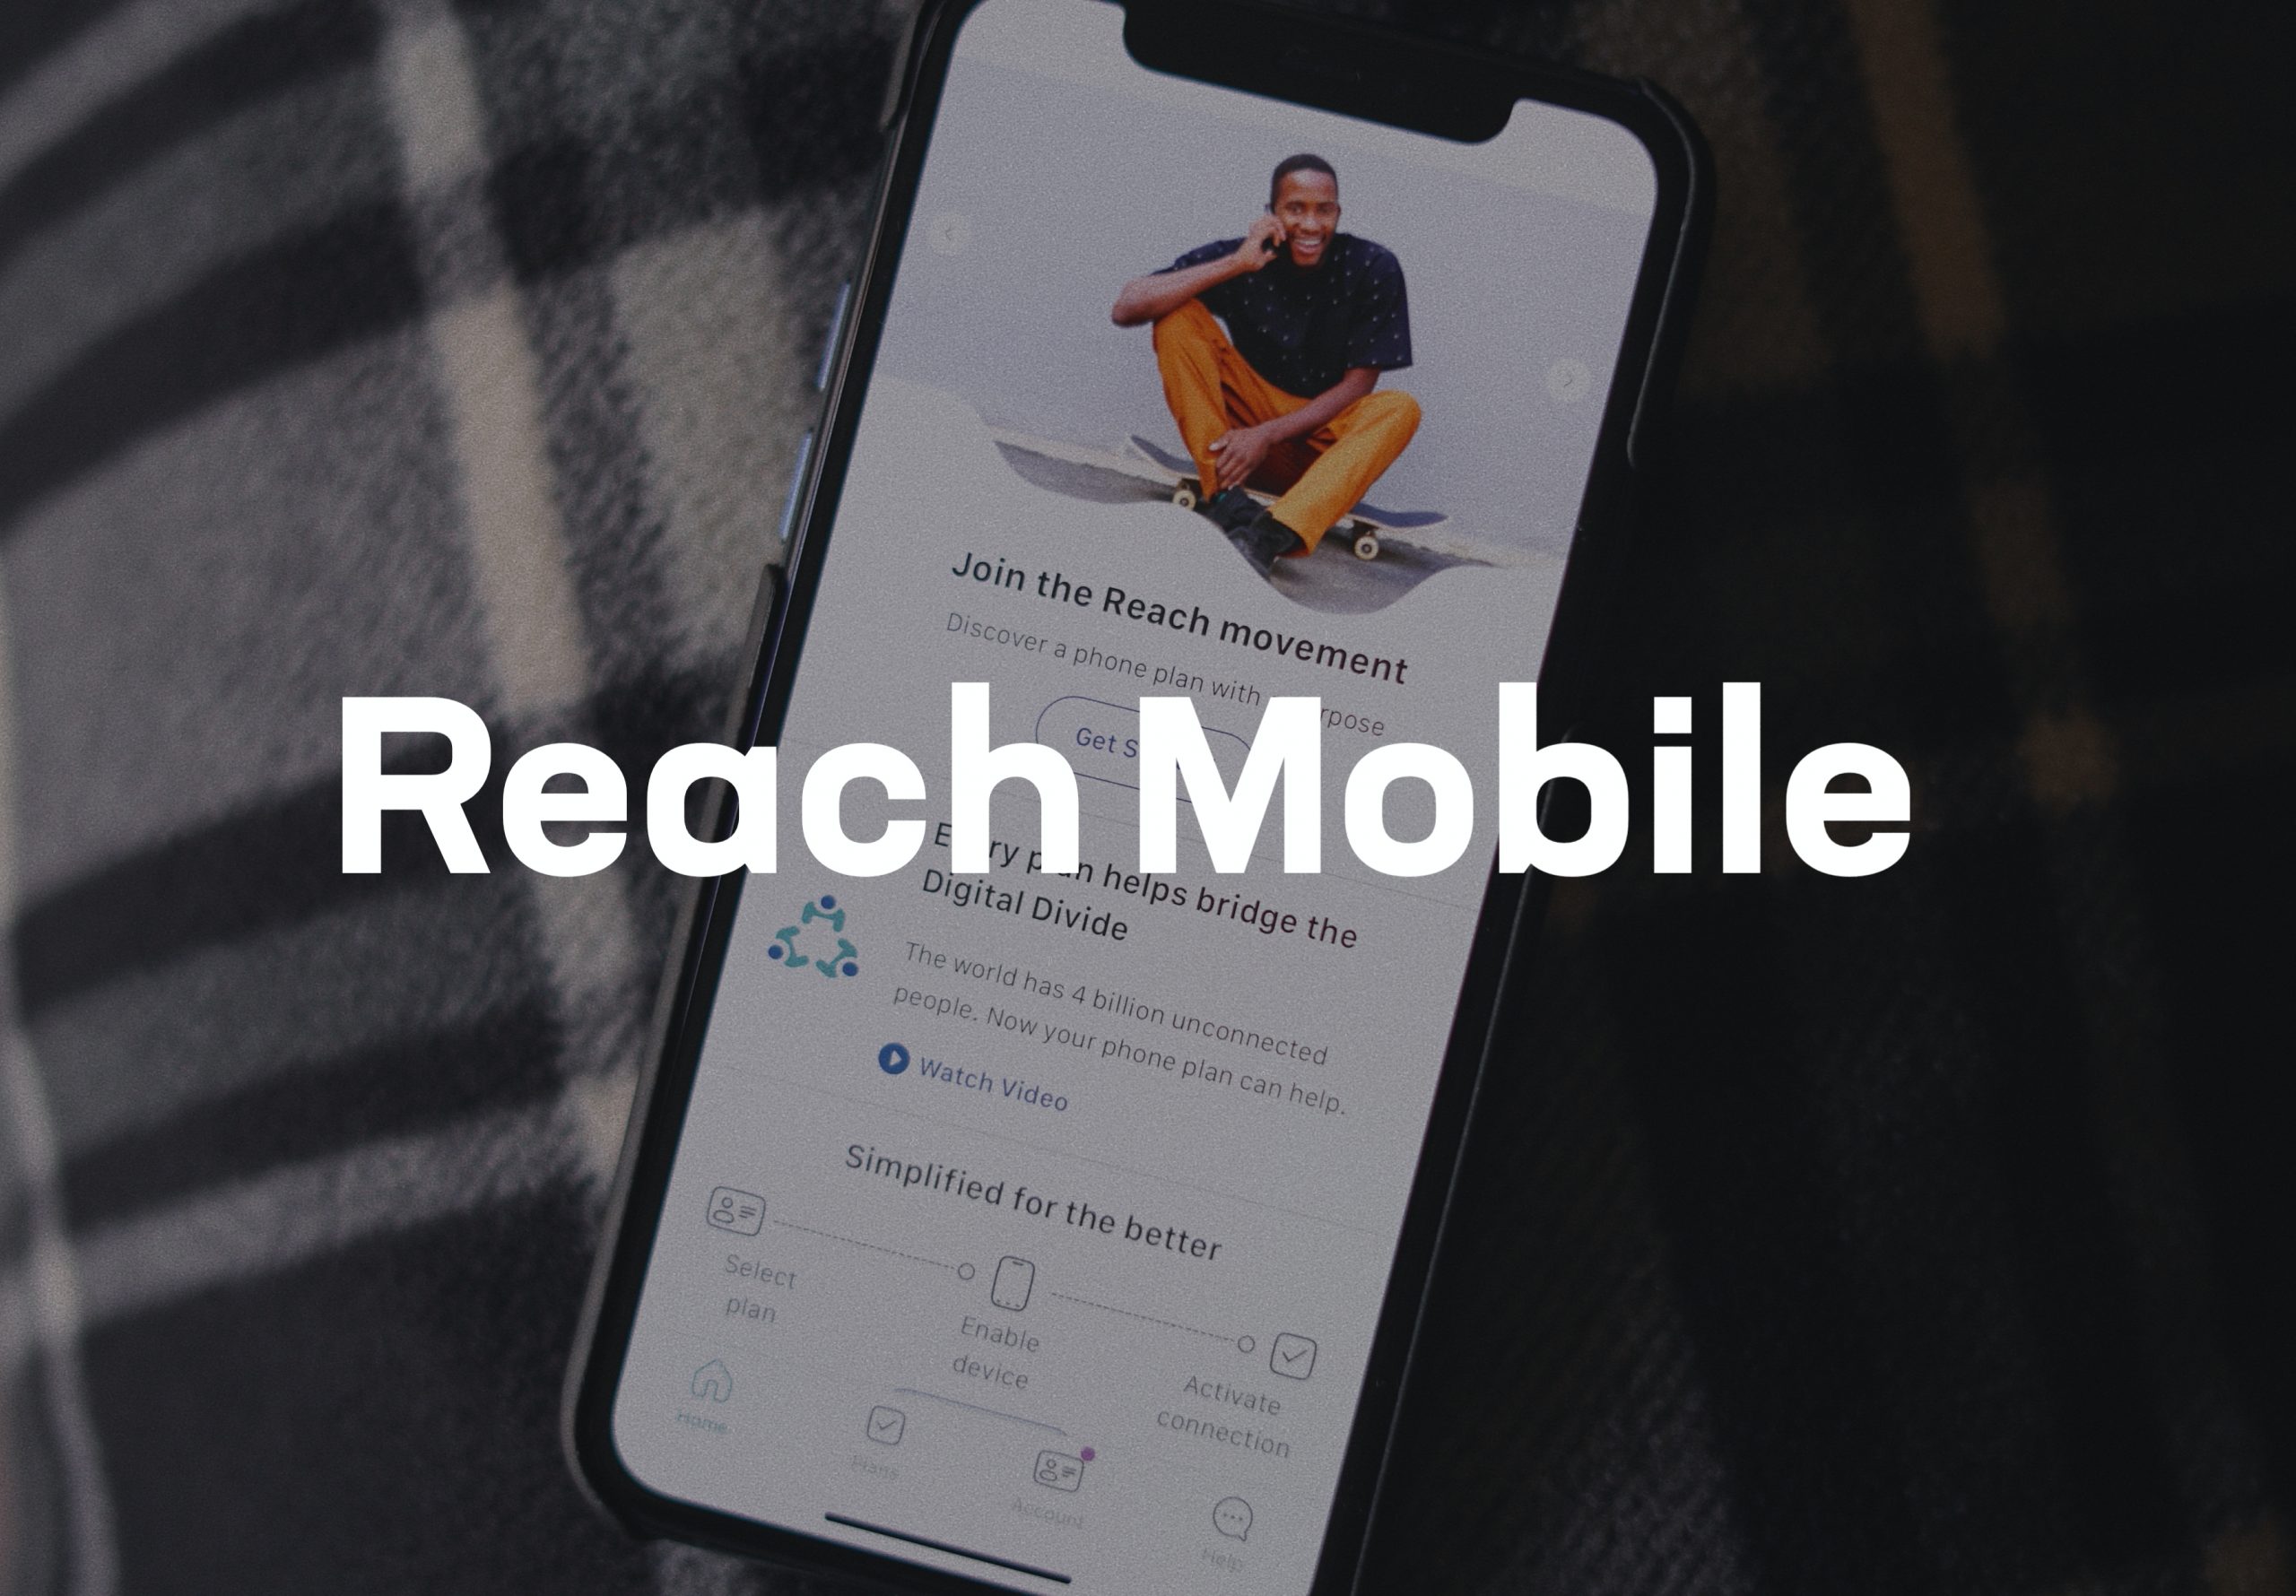 Reach Mobile is a carrier making a difference – plans, prices and reviews